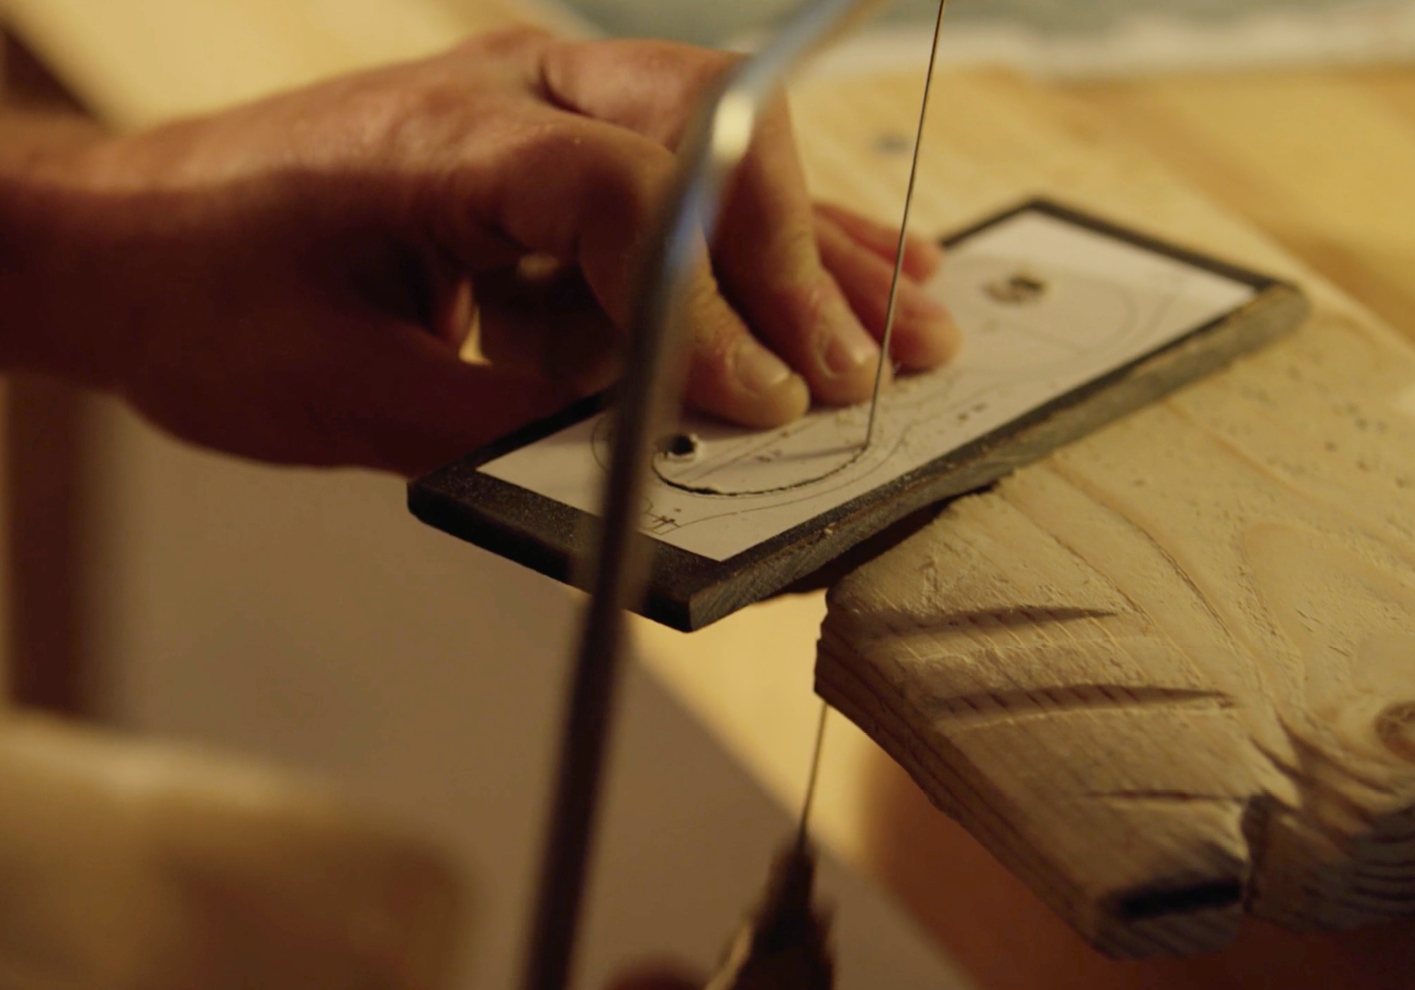 The technical know-how of its craftspeople allows Meyrowitz to guarantee impeccable quality